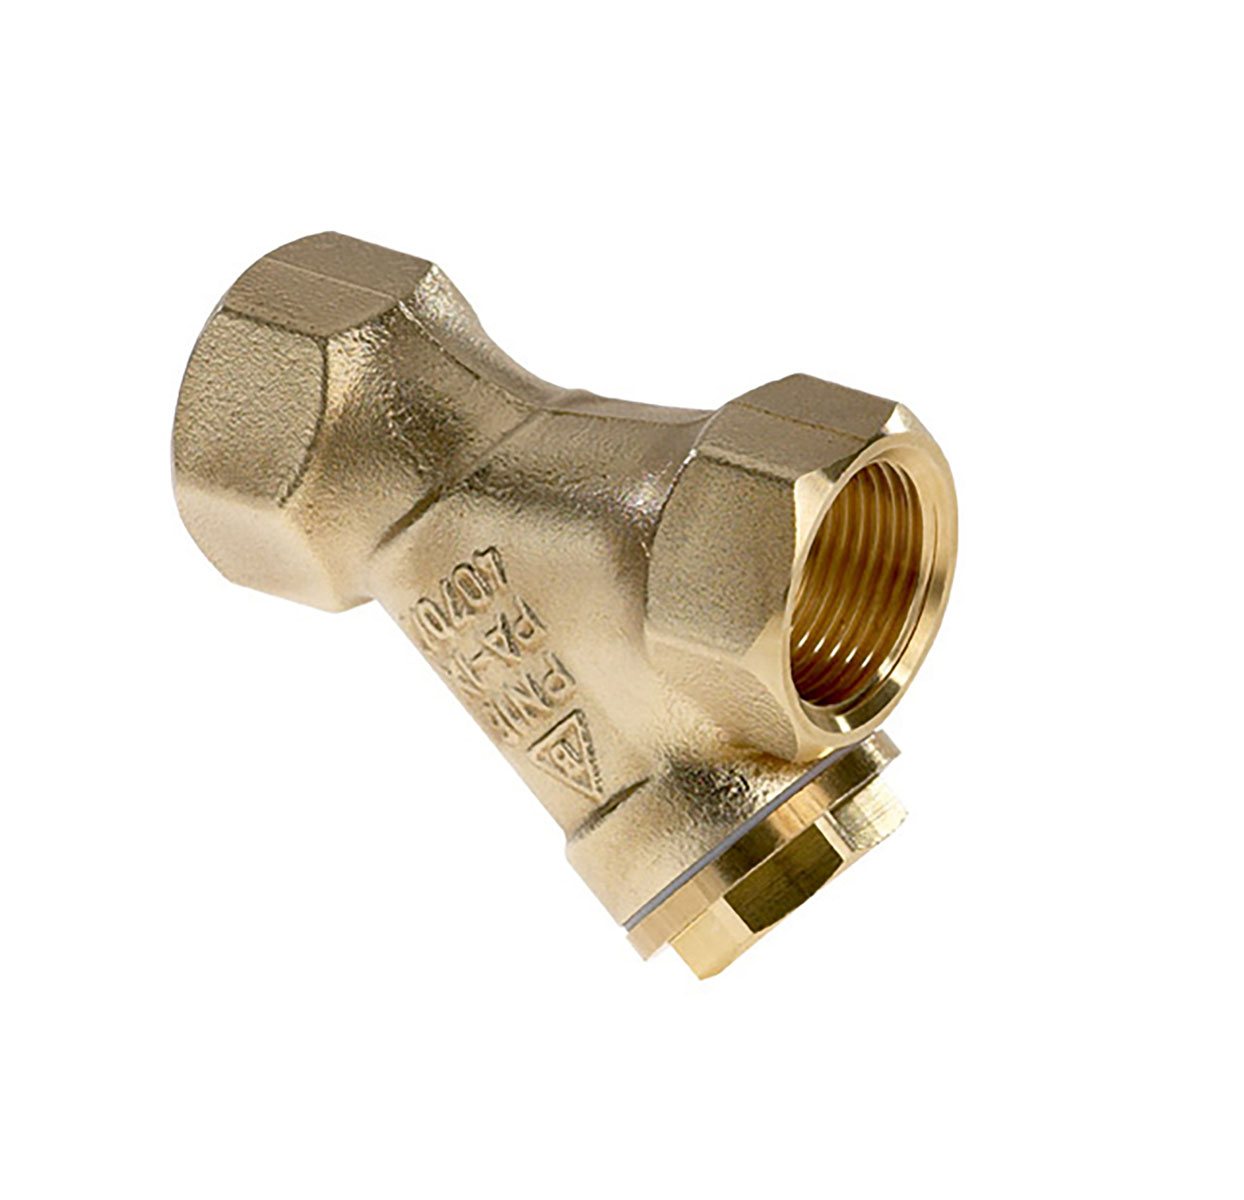 1450150 - CR-Brass Strainer Strainer with PTFE-sealing (Teflon)